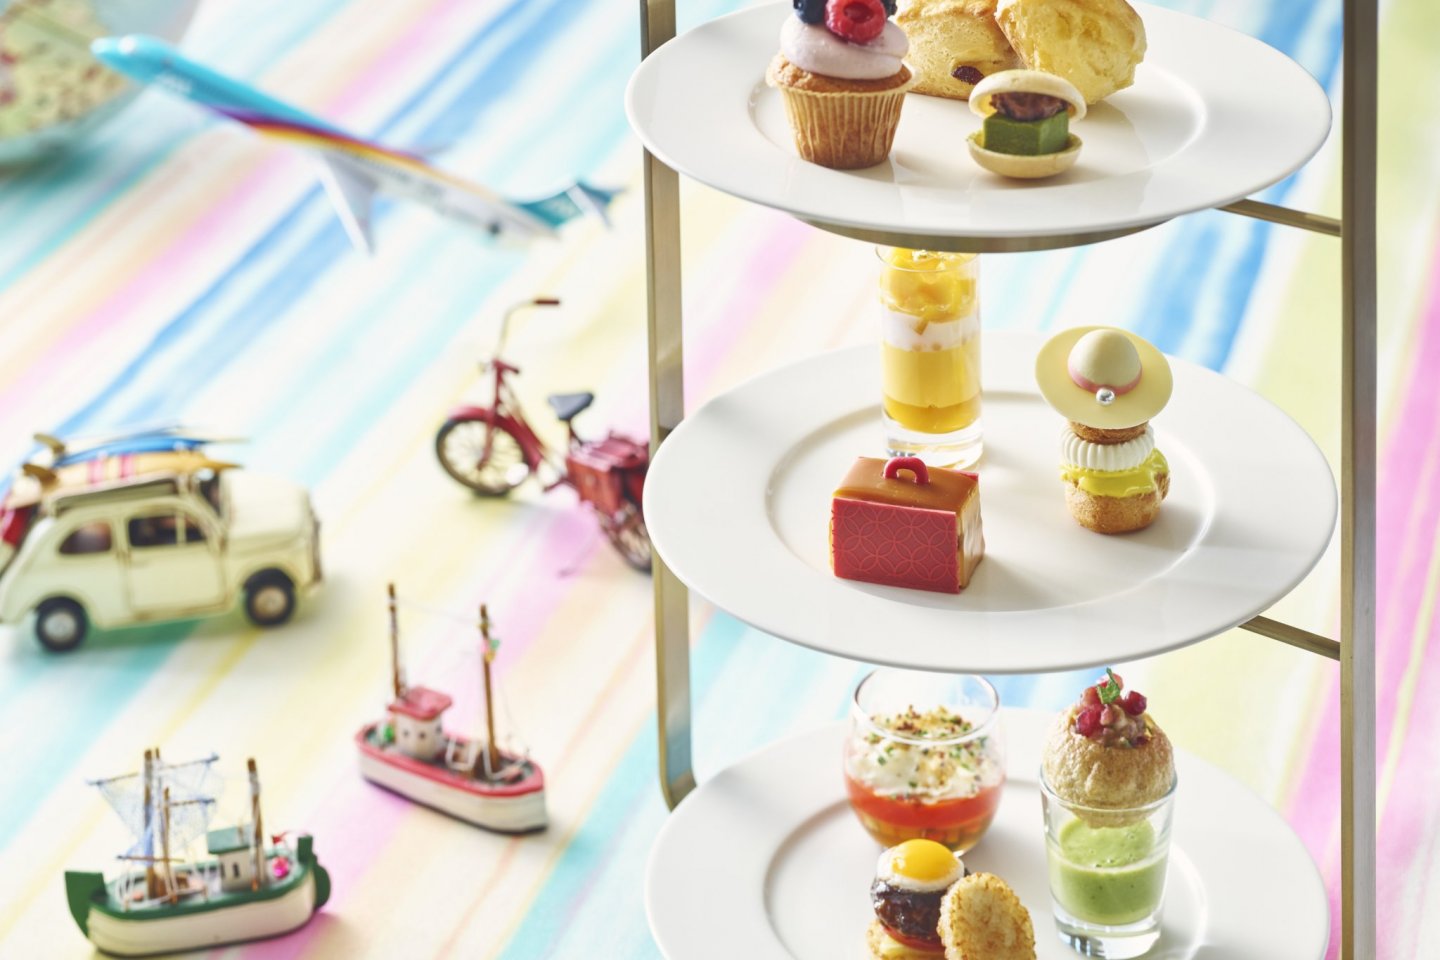 The Travel Afternoon Tea brings various cuisines to you